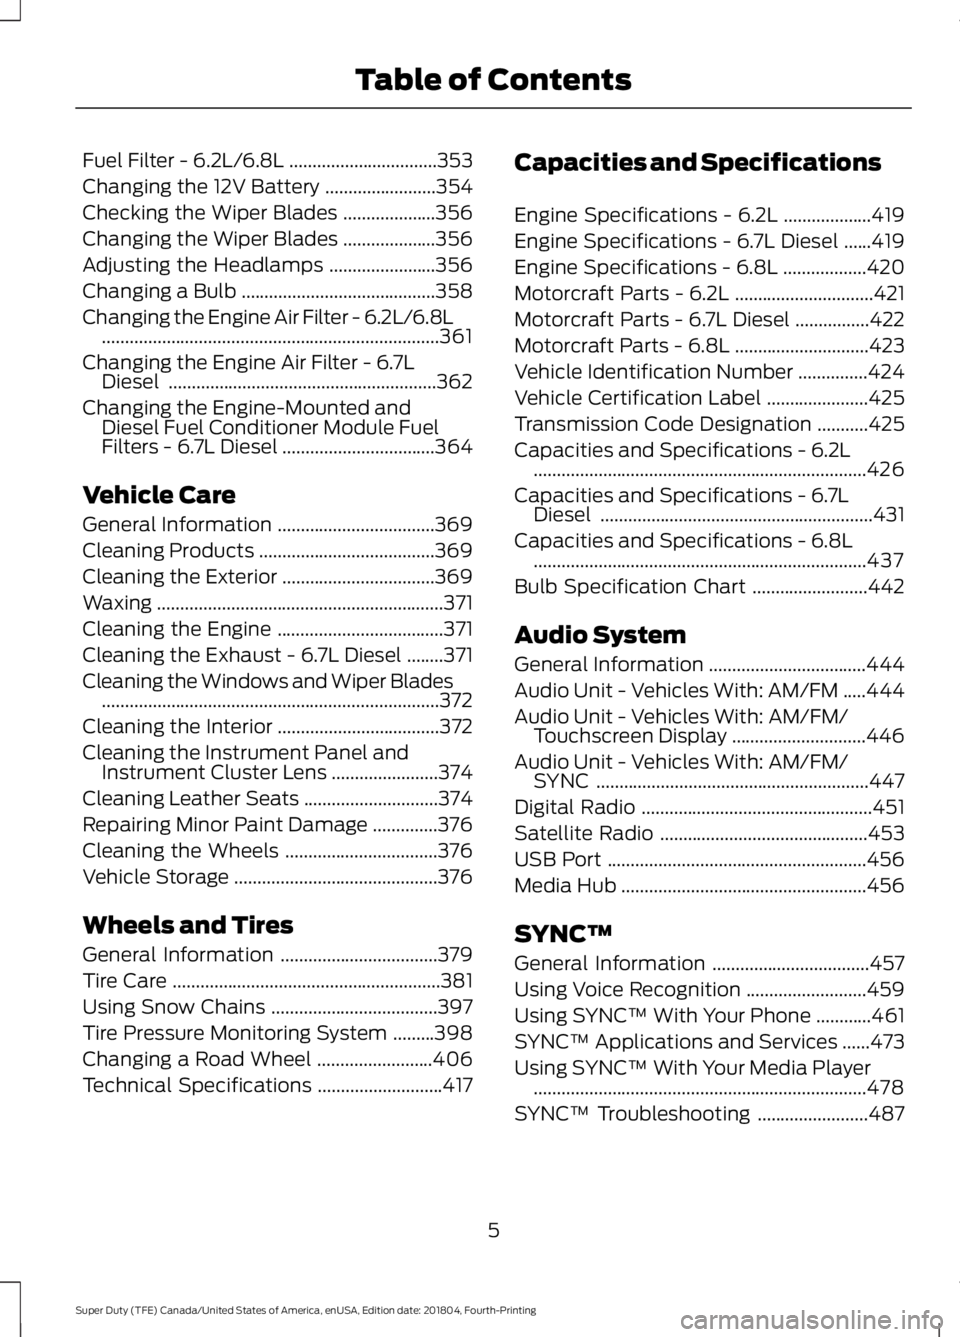 FORD F250 SUPER DUTY 2019  Owners Manual Fuel Filter - 6.2L/6.8L
................................353
Changing the 12V Battery ........................
354
Checking the Wiper Blades ....................
356
Changing the Wiper Blades .........